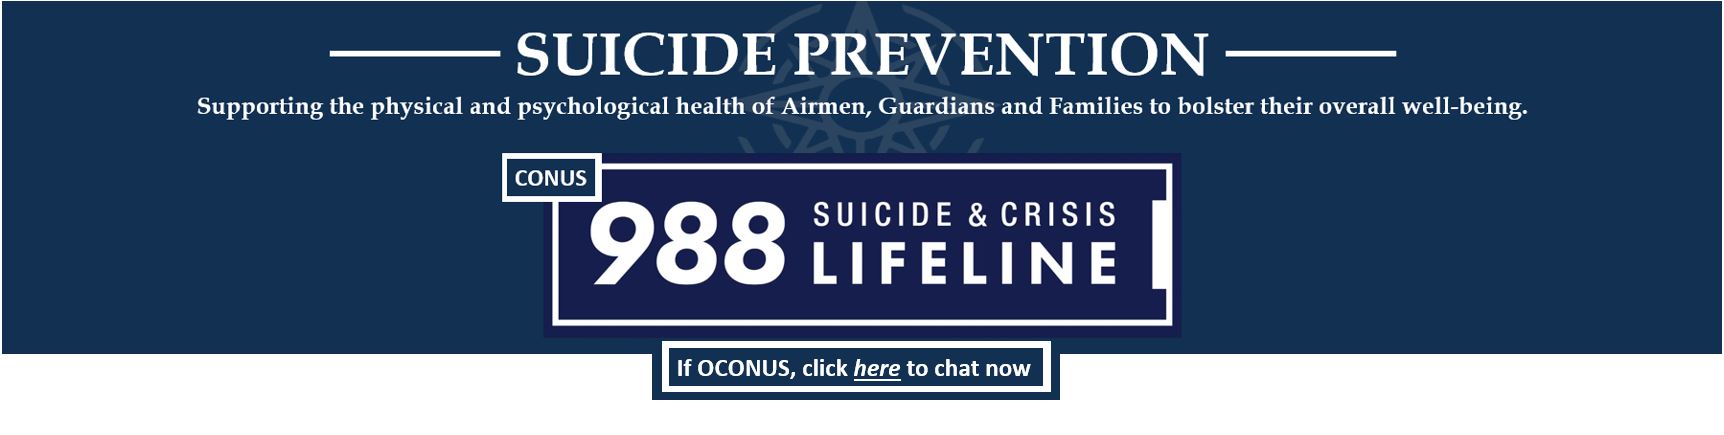 Suicide Prevention page header.  In CONUS, dial 988 if you need immediate crisis assistance or click to chat now.